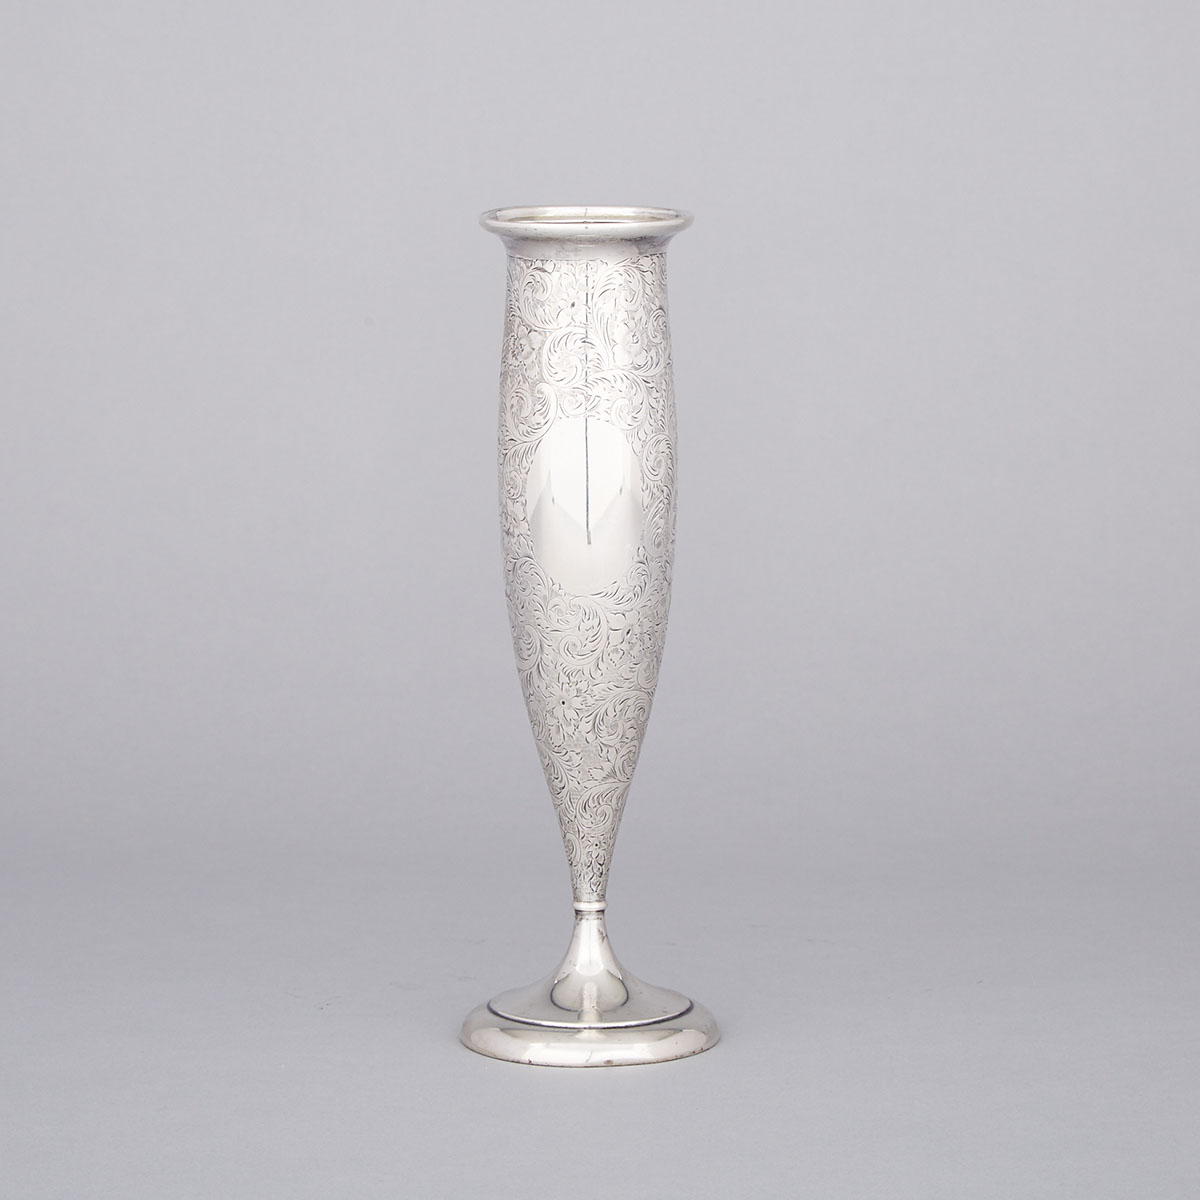 Canadian Silver Vase, Henry Birks & Sons, Montreal, Que., 1904-1924